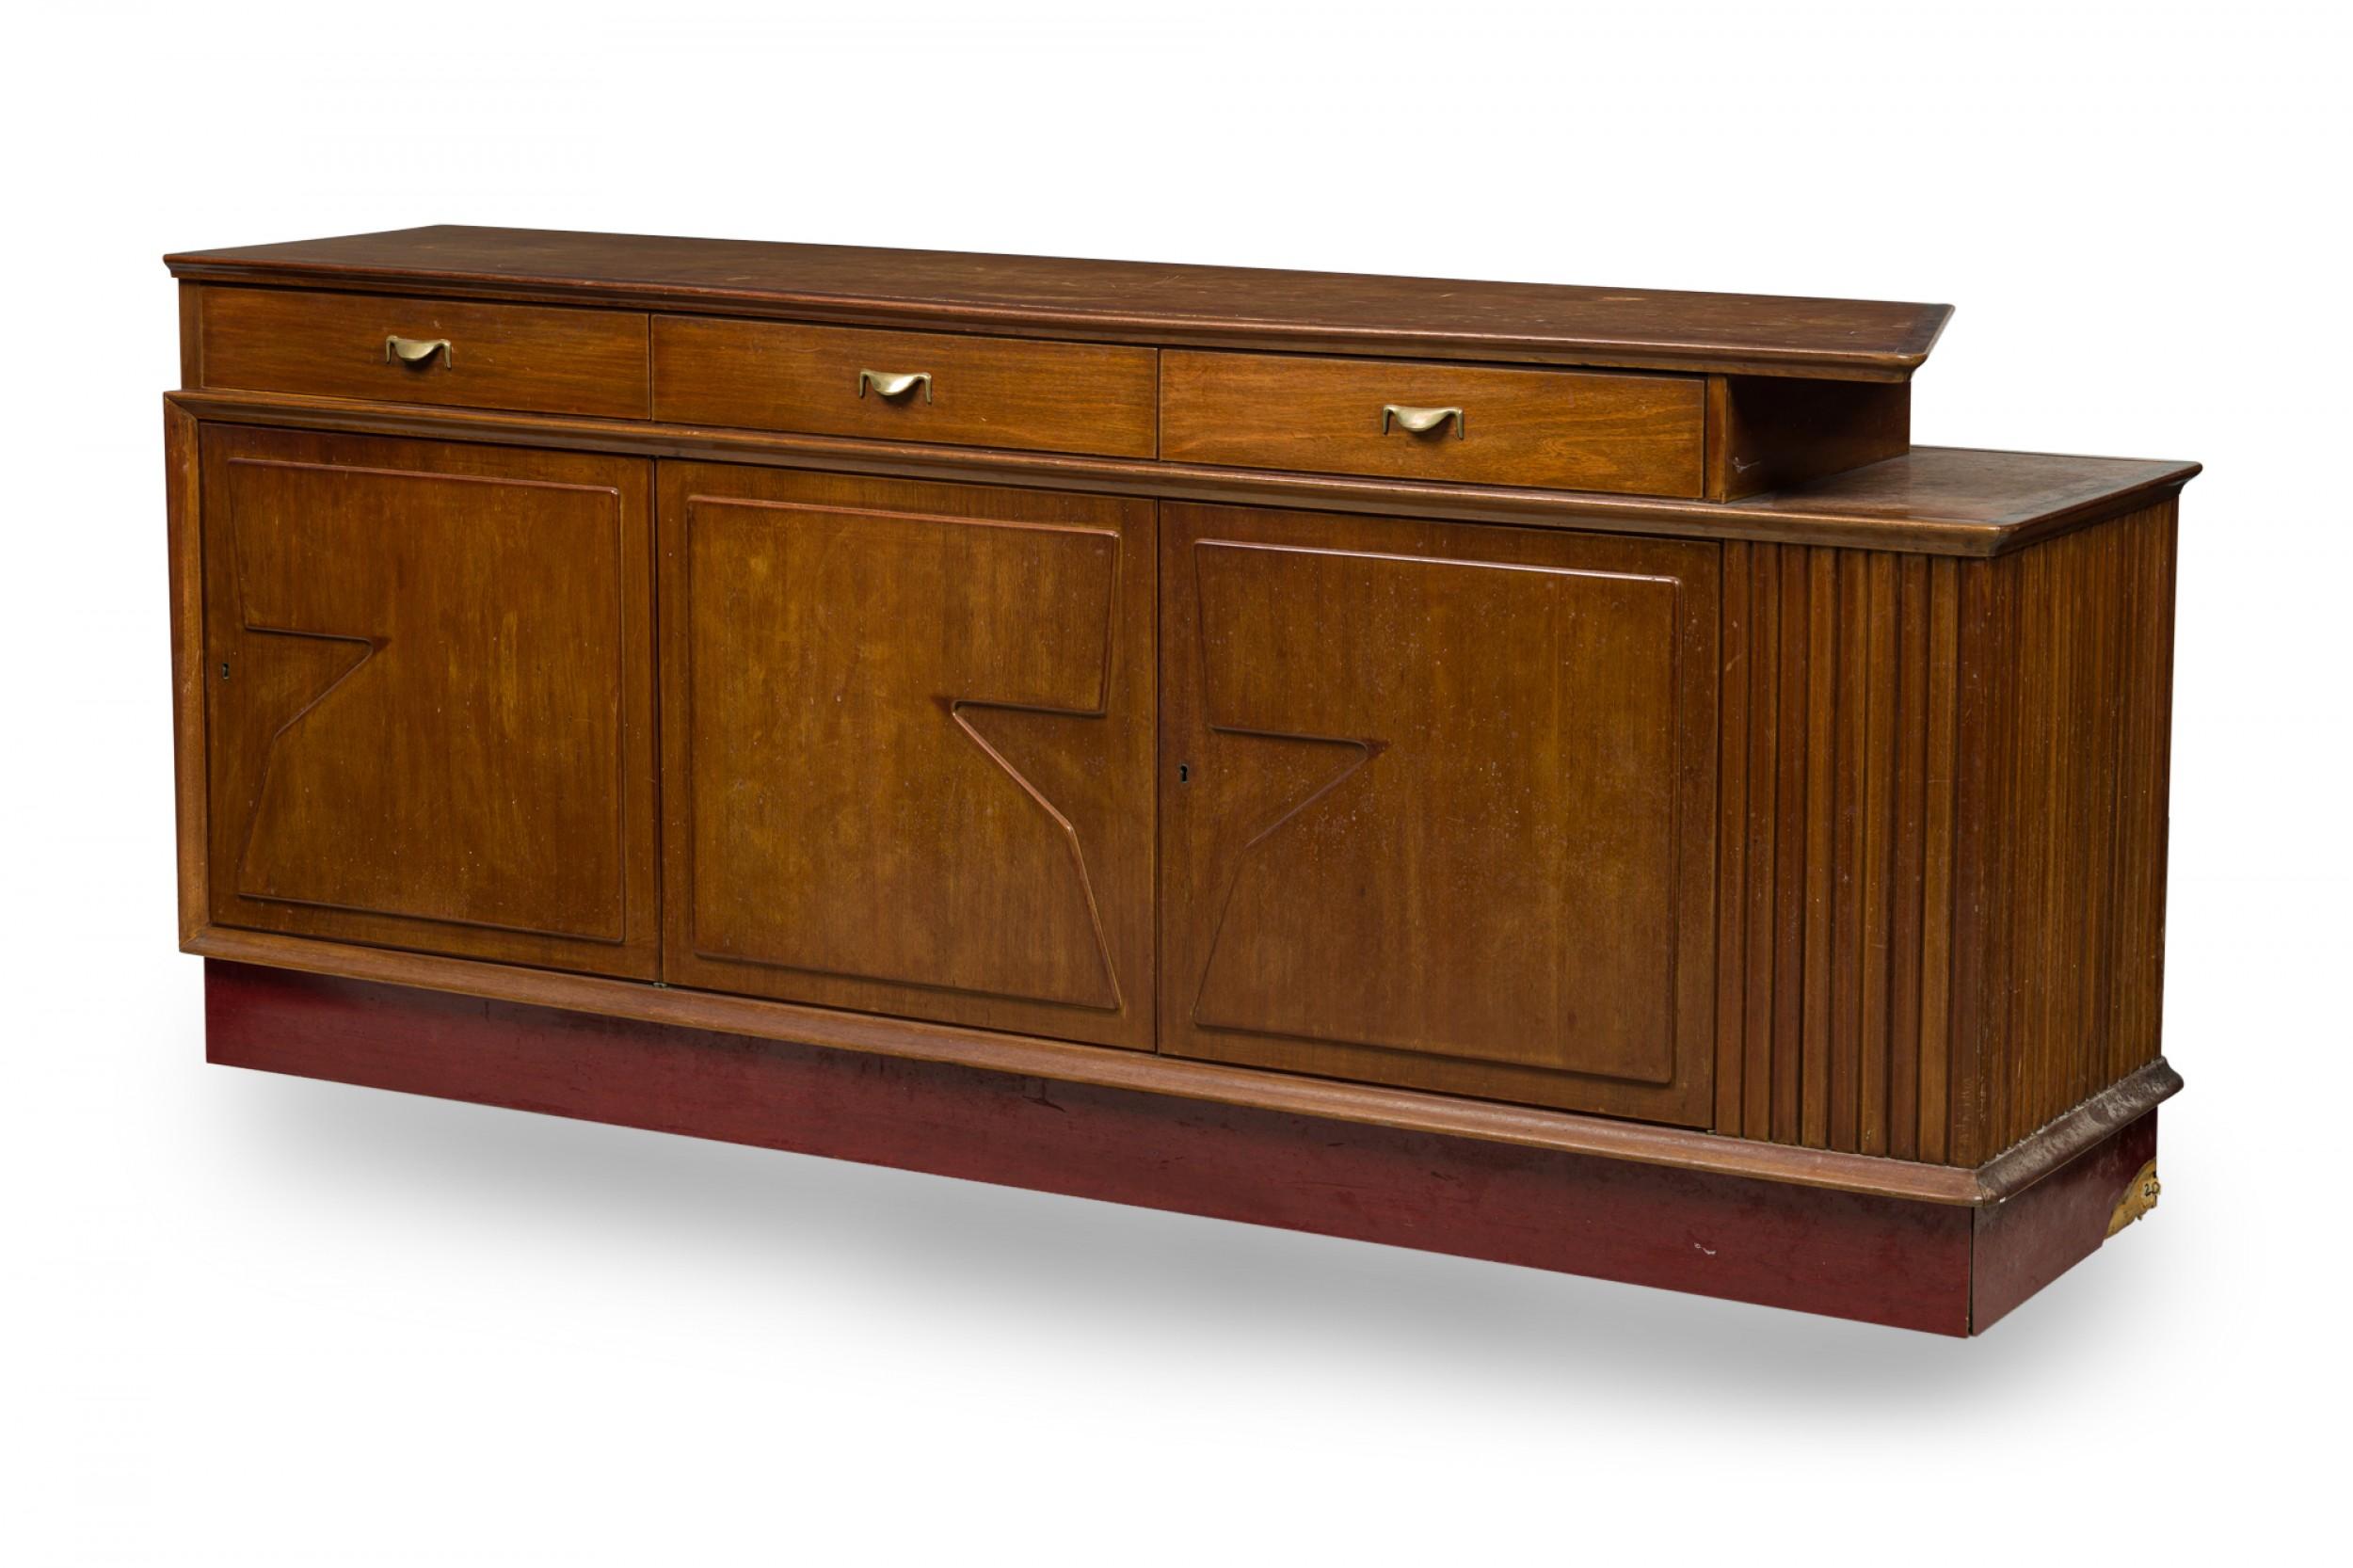 Midcentury Italian Modern buffet / room divider / credenza with a walnut case featuring three upper drawers with brass drawer pulls over three hinged cabinets with decorative geometric cutouts. (Vittorio Dassi).